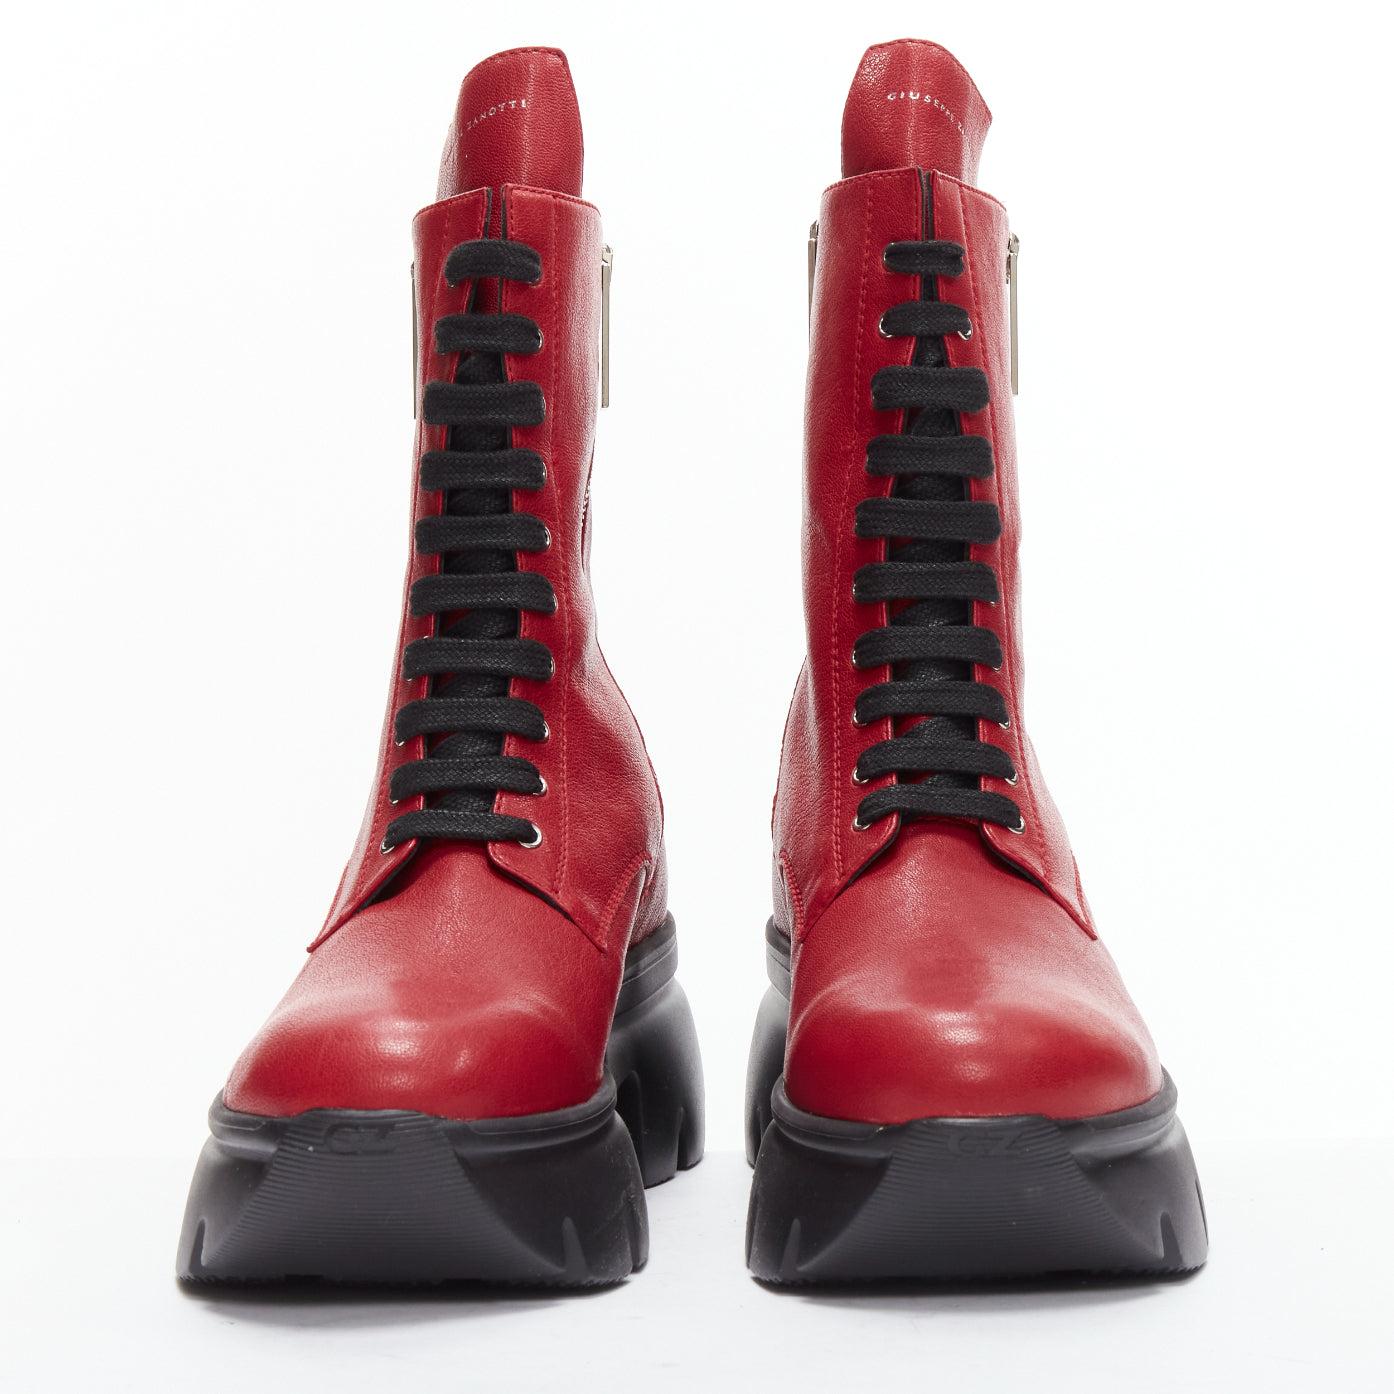 Red GIUSEPPE ZANOTTI Apocalypse red leather side zip combat boots EU39 For Sale